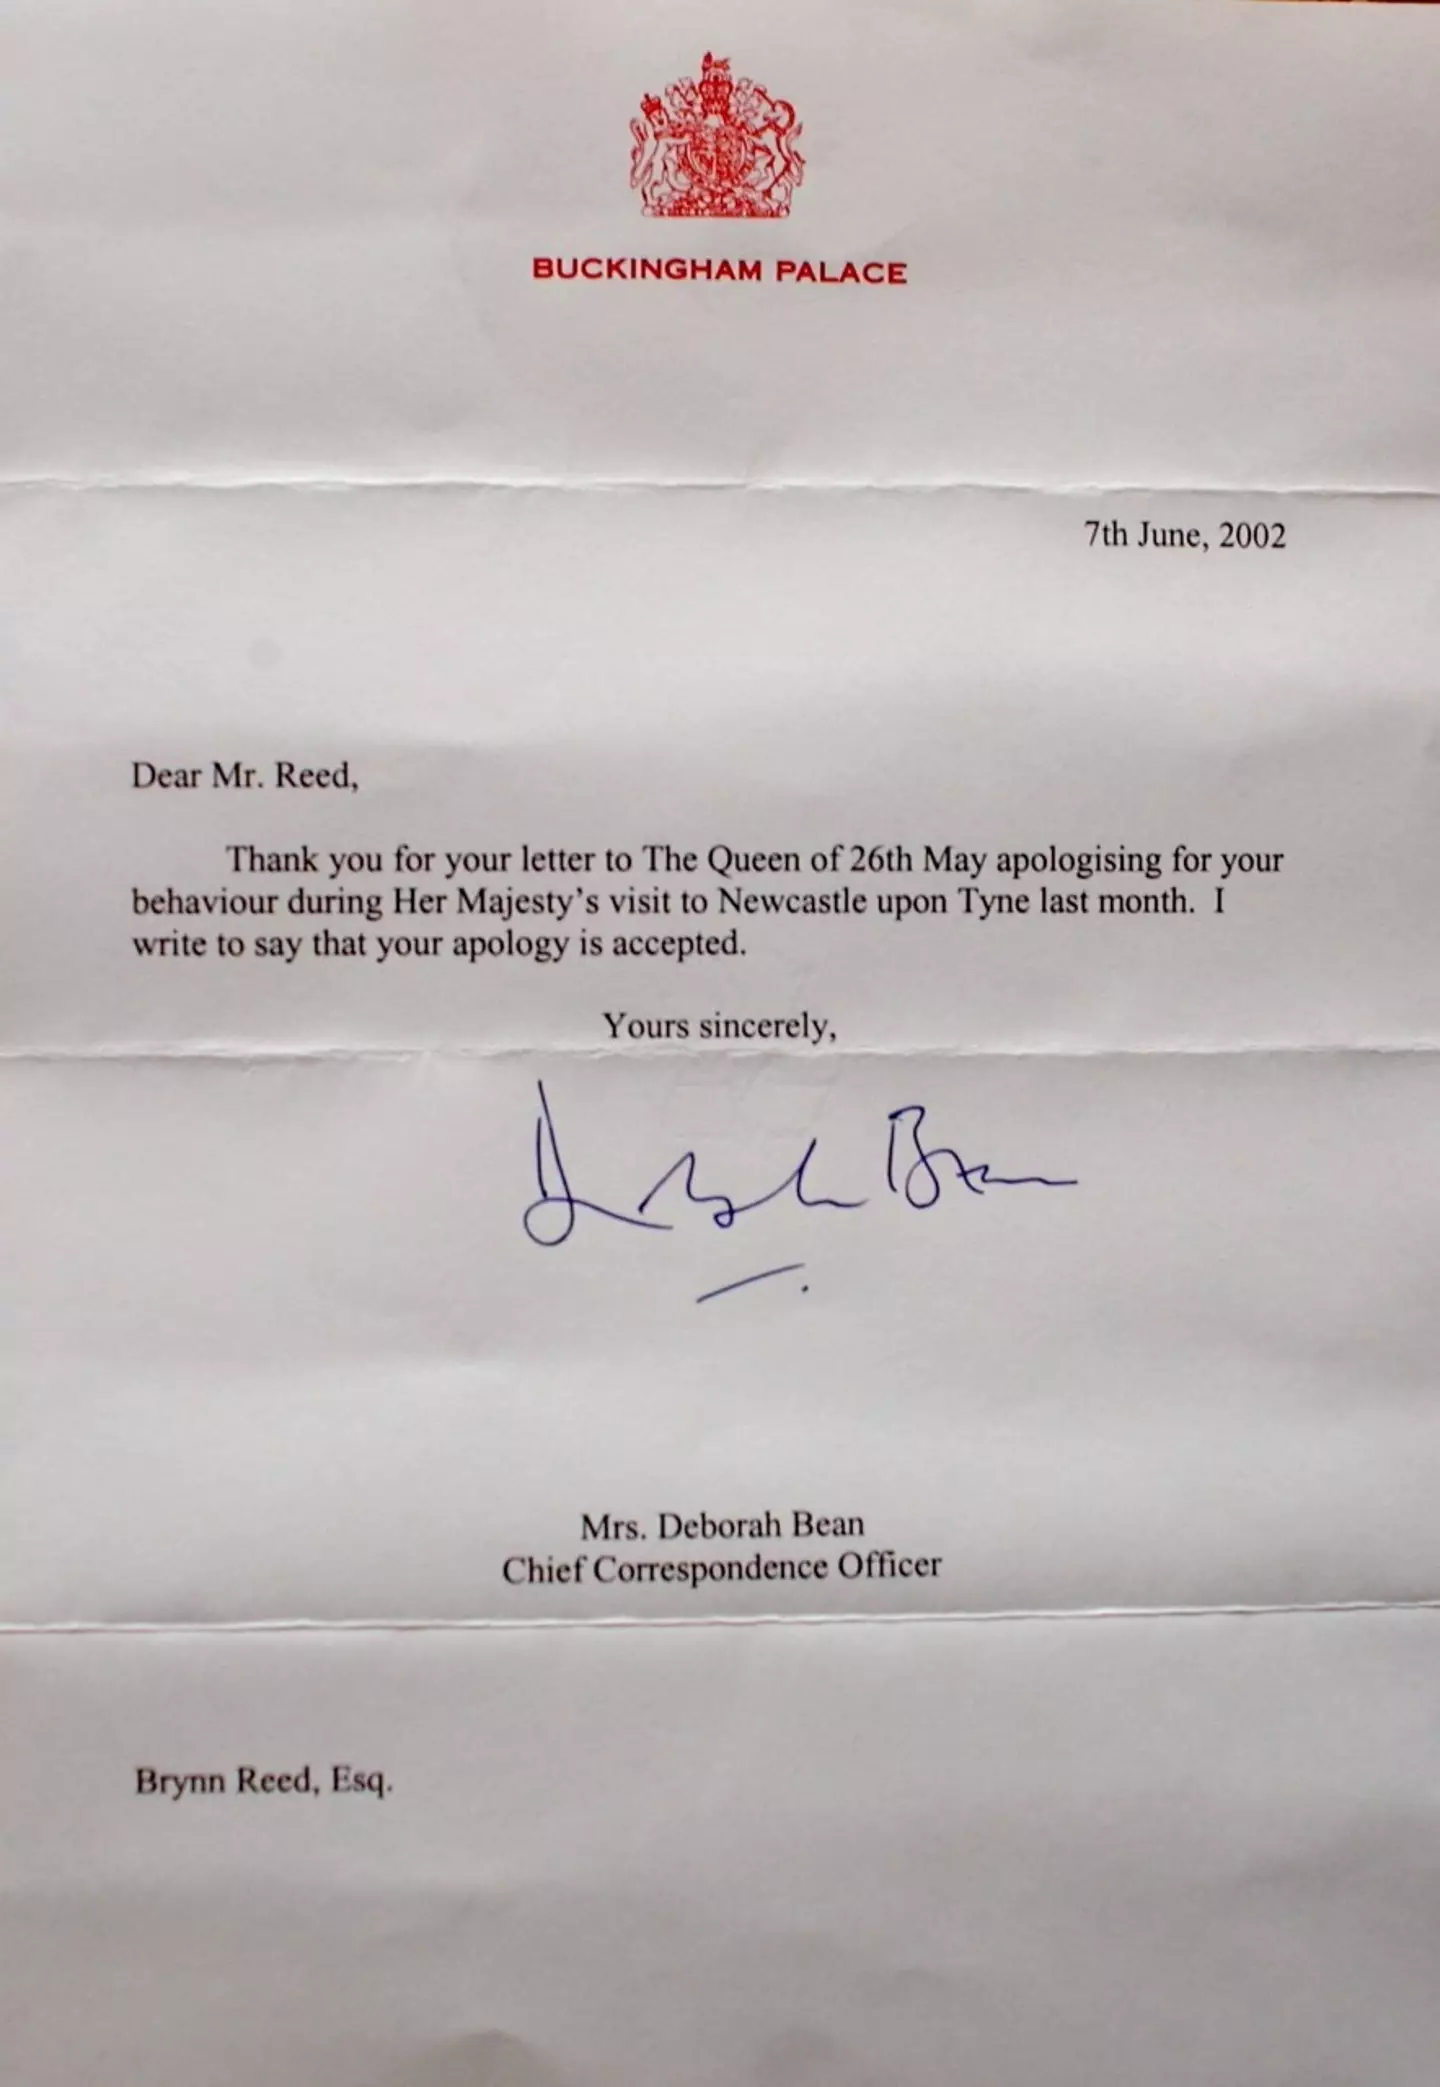 He wrote a letter of apology to the Queen and, remarkably, received a reply in less  than two weeks.